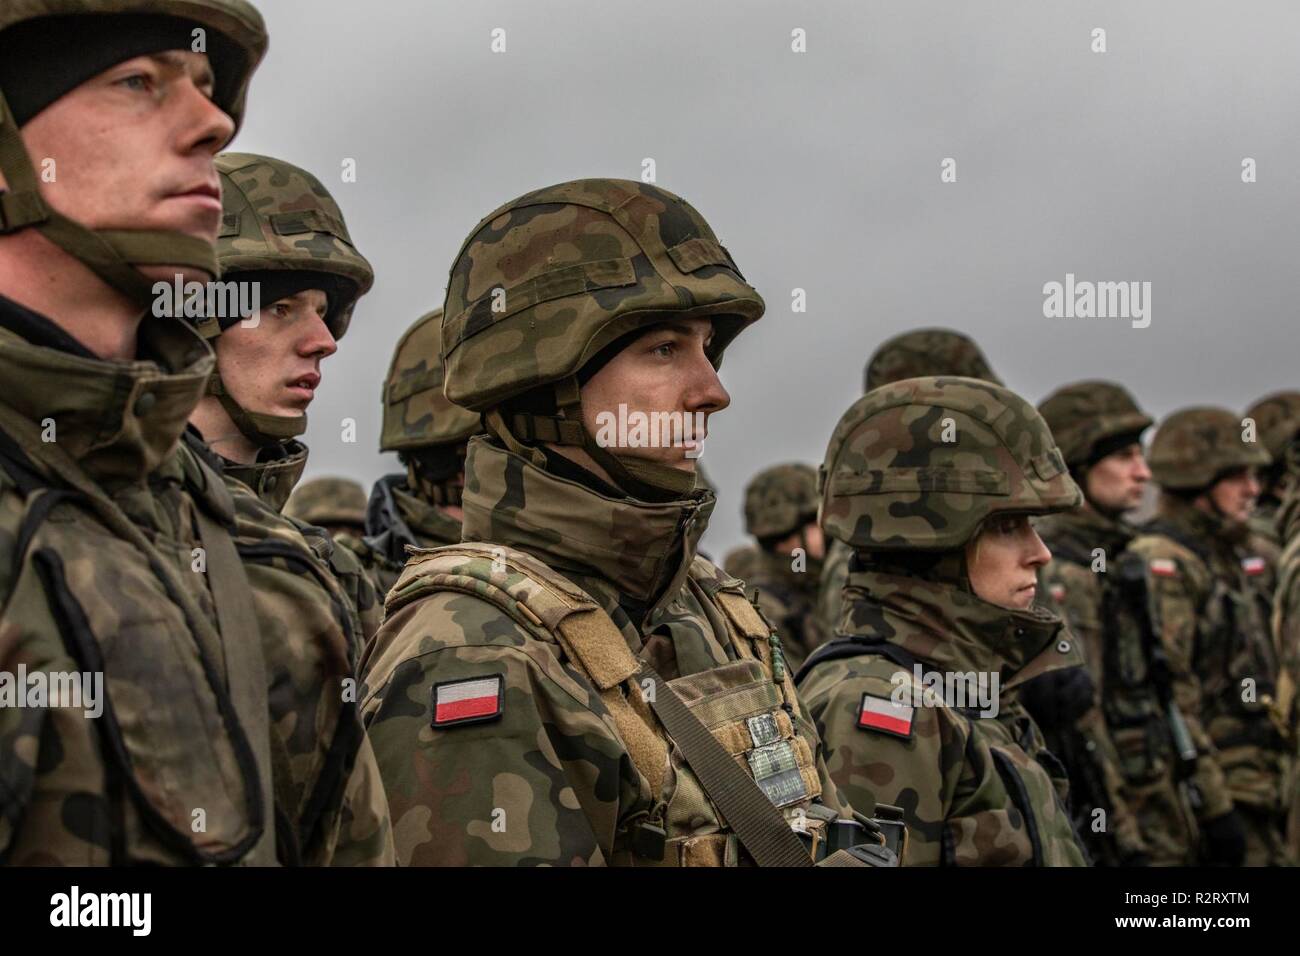 A Polish Soldier assigned to Battle Group Poland stands at the position of  attention during the opening ceremony of the NATO joint training exercise,  Anakonda 18, at Bemowo Piskie Training Area, Poland,